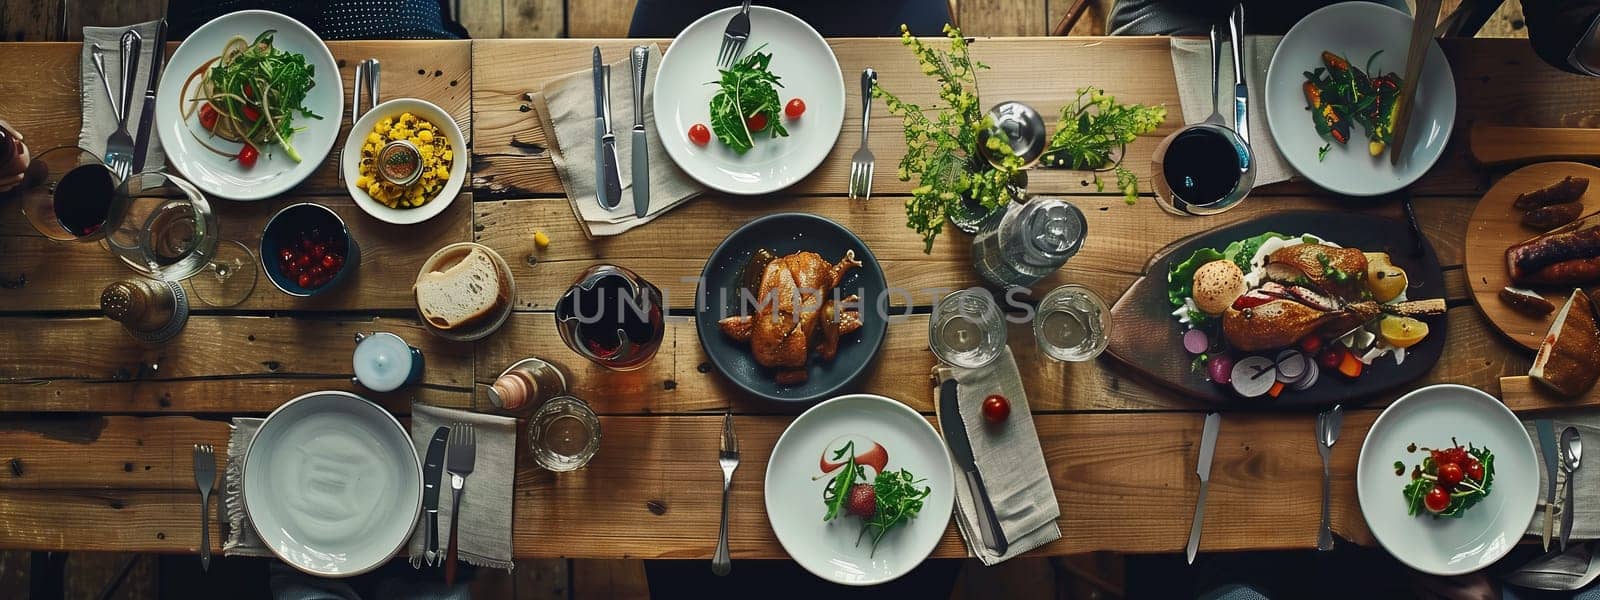 a wooden table topped with plates of food and wine glasses by richwolf